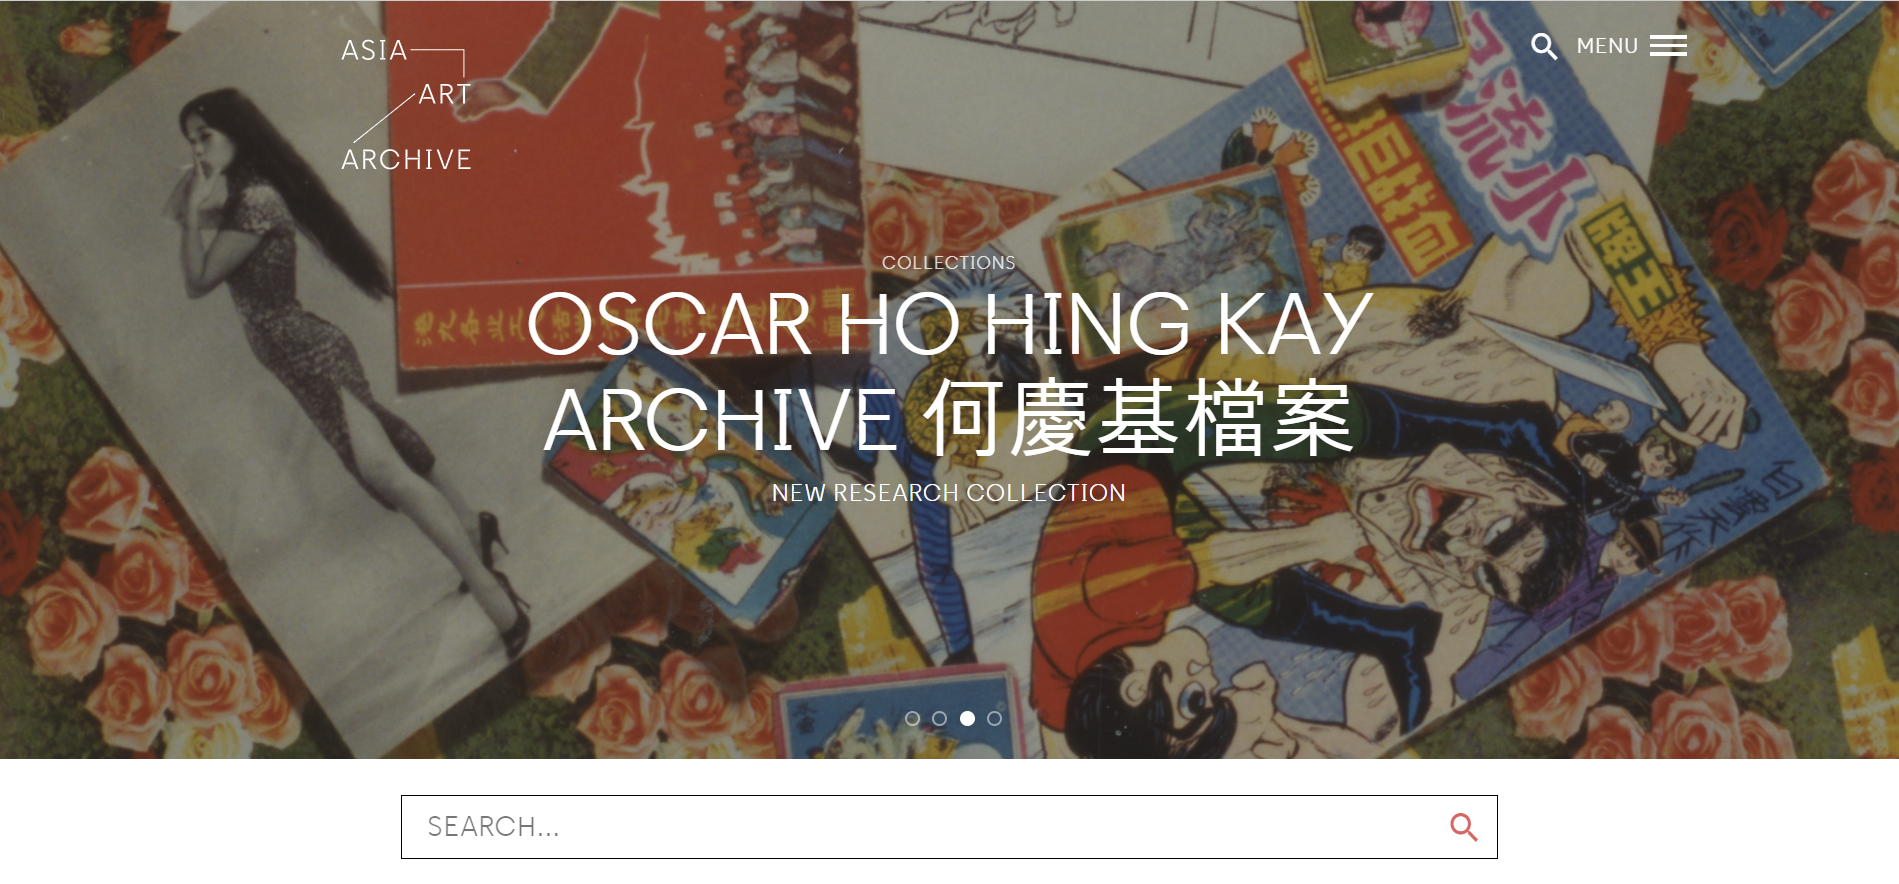 Asia Art Archive 1.png